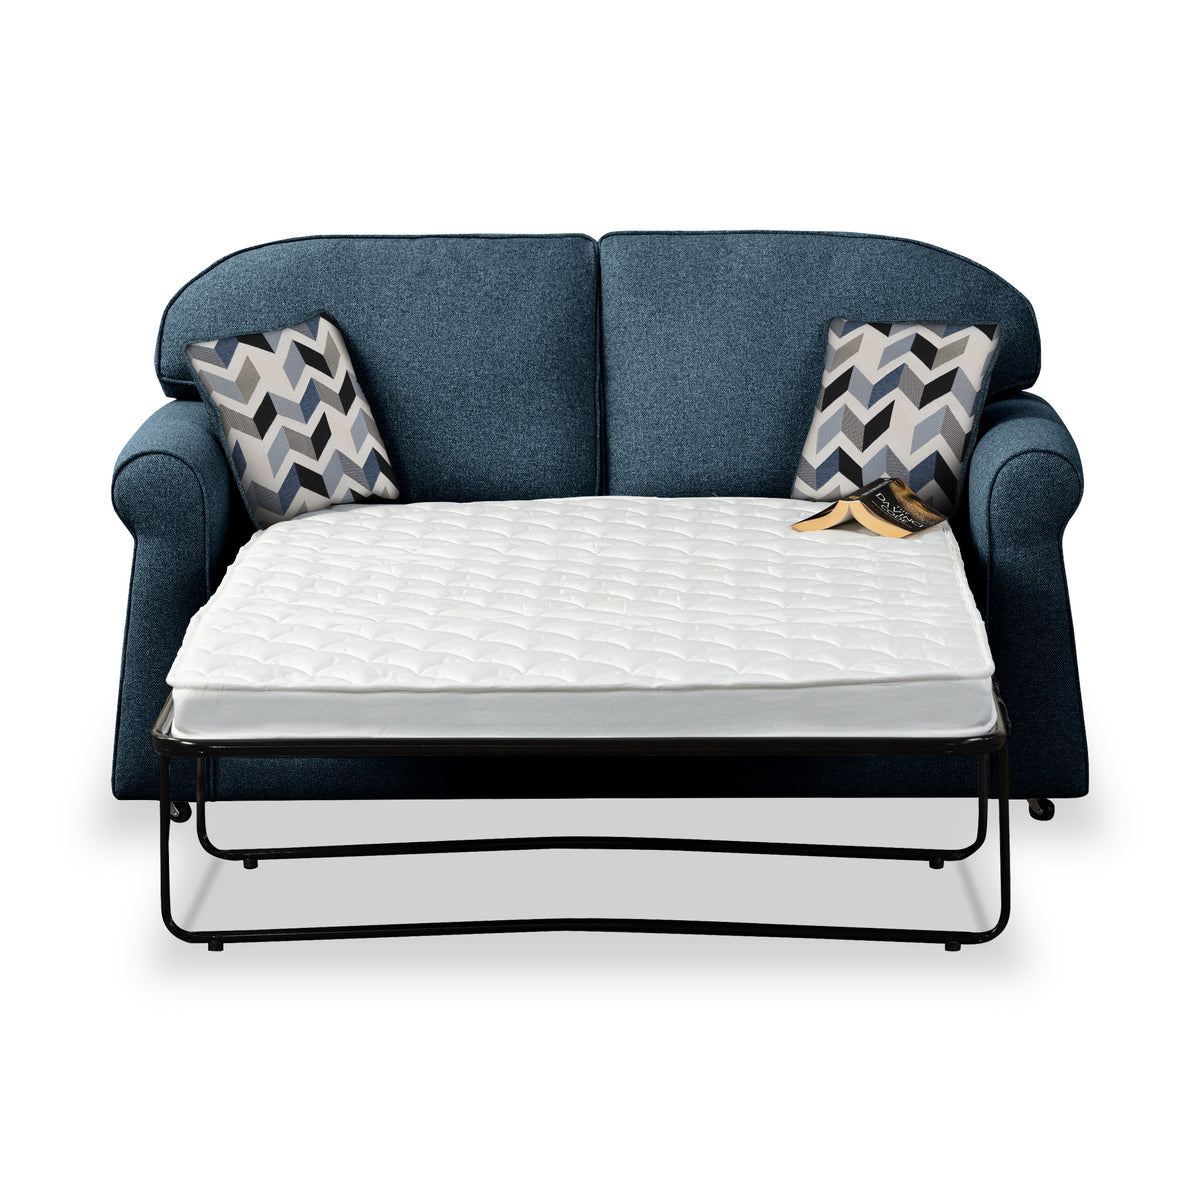 Giselle Midnight Soft Weave 2 Seater Sofabed with Denim Scatter Cushions from Roseland Furniture